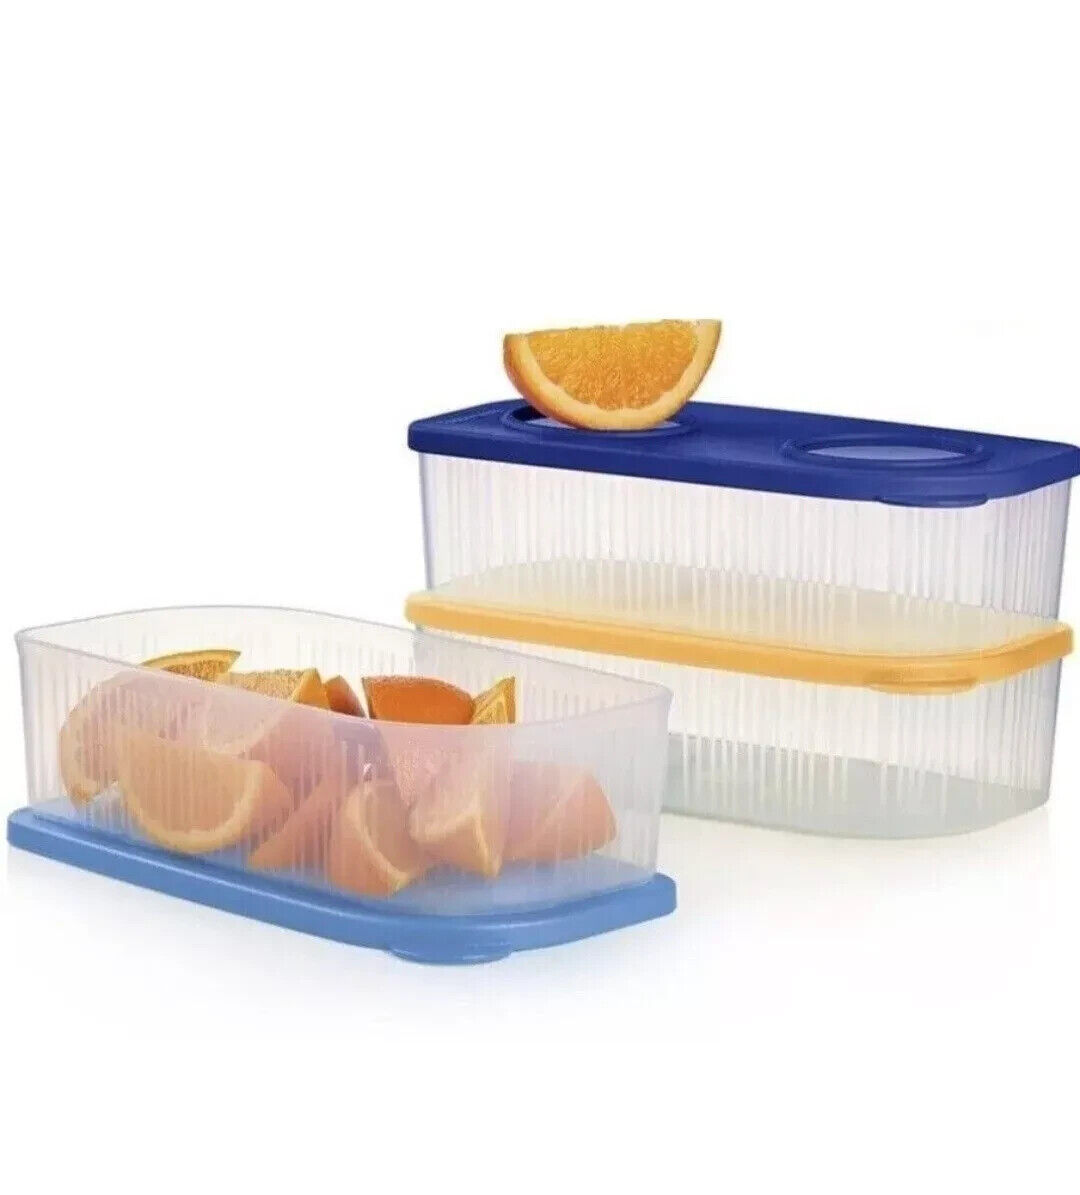 NEW TUPPERWARE Fresh N Cool Containers 3-Pc Medium Set meal prep lunch storage